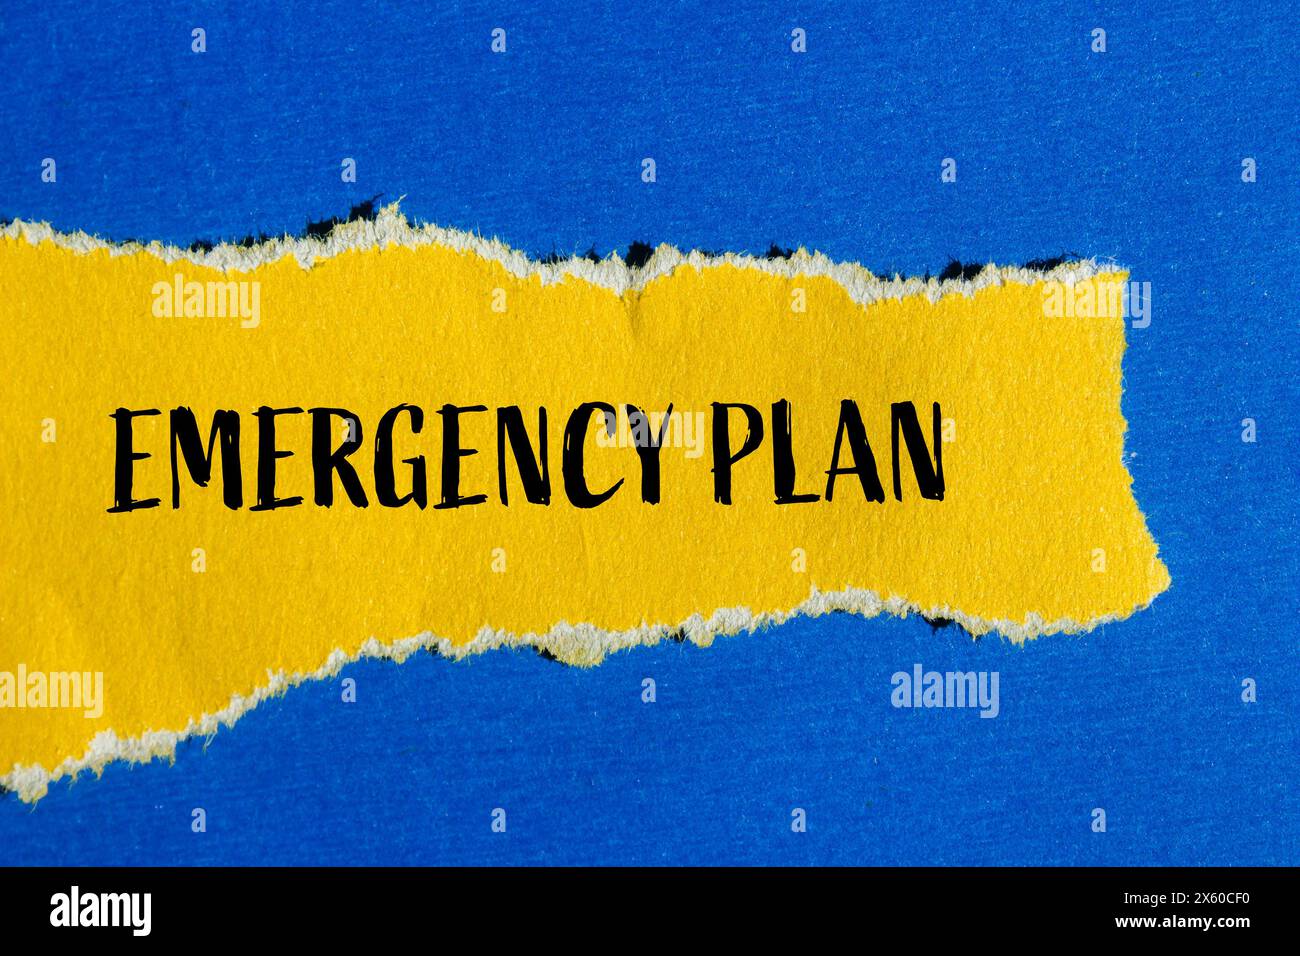 Emergency plan words written on ripped yellow paper with blue background. Conceptual emergency plan symbol. Copy space. Stock Photo